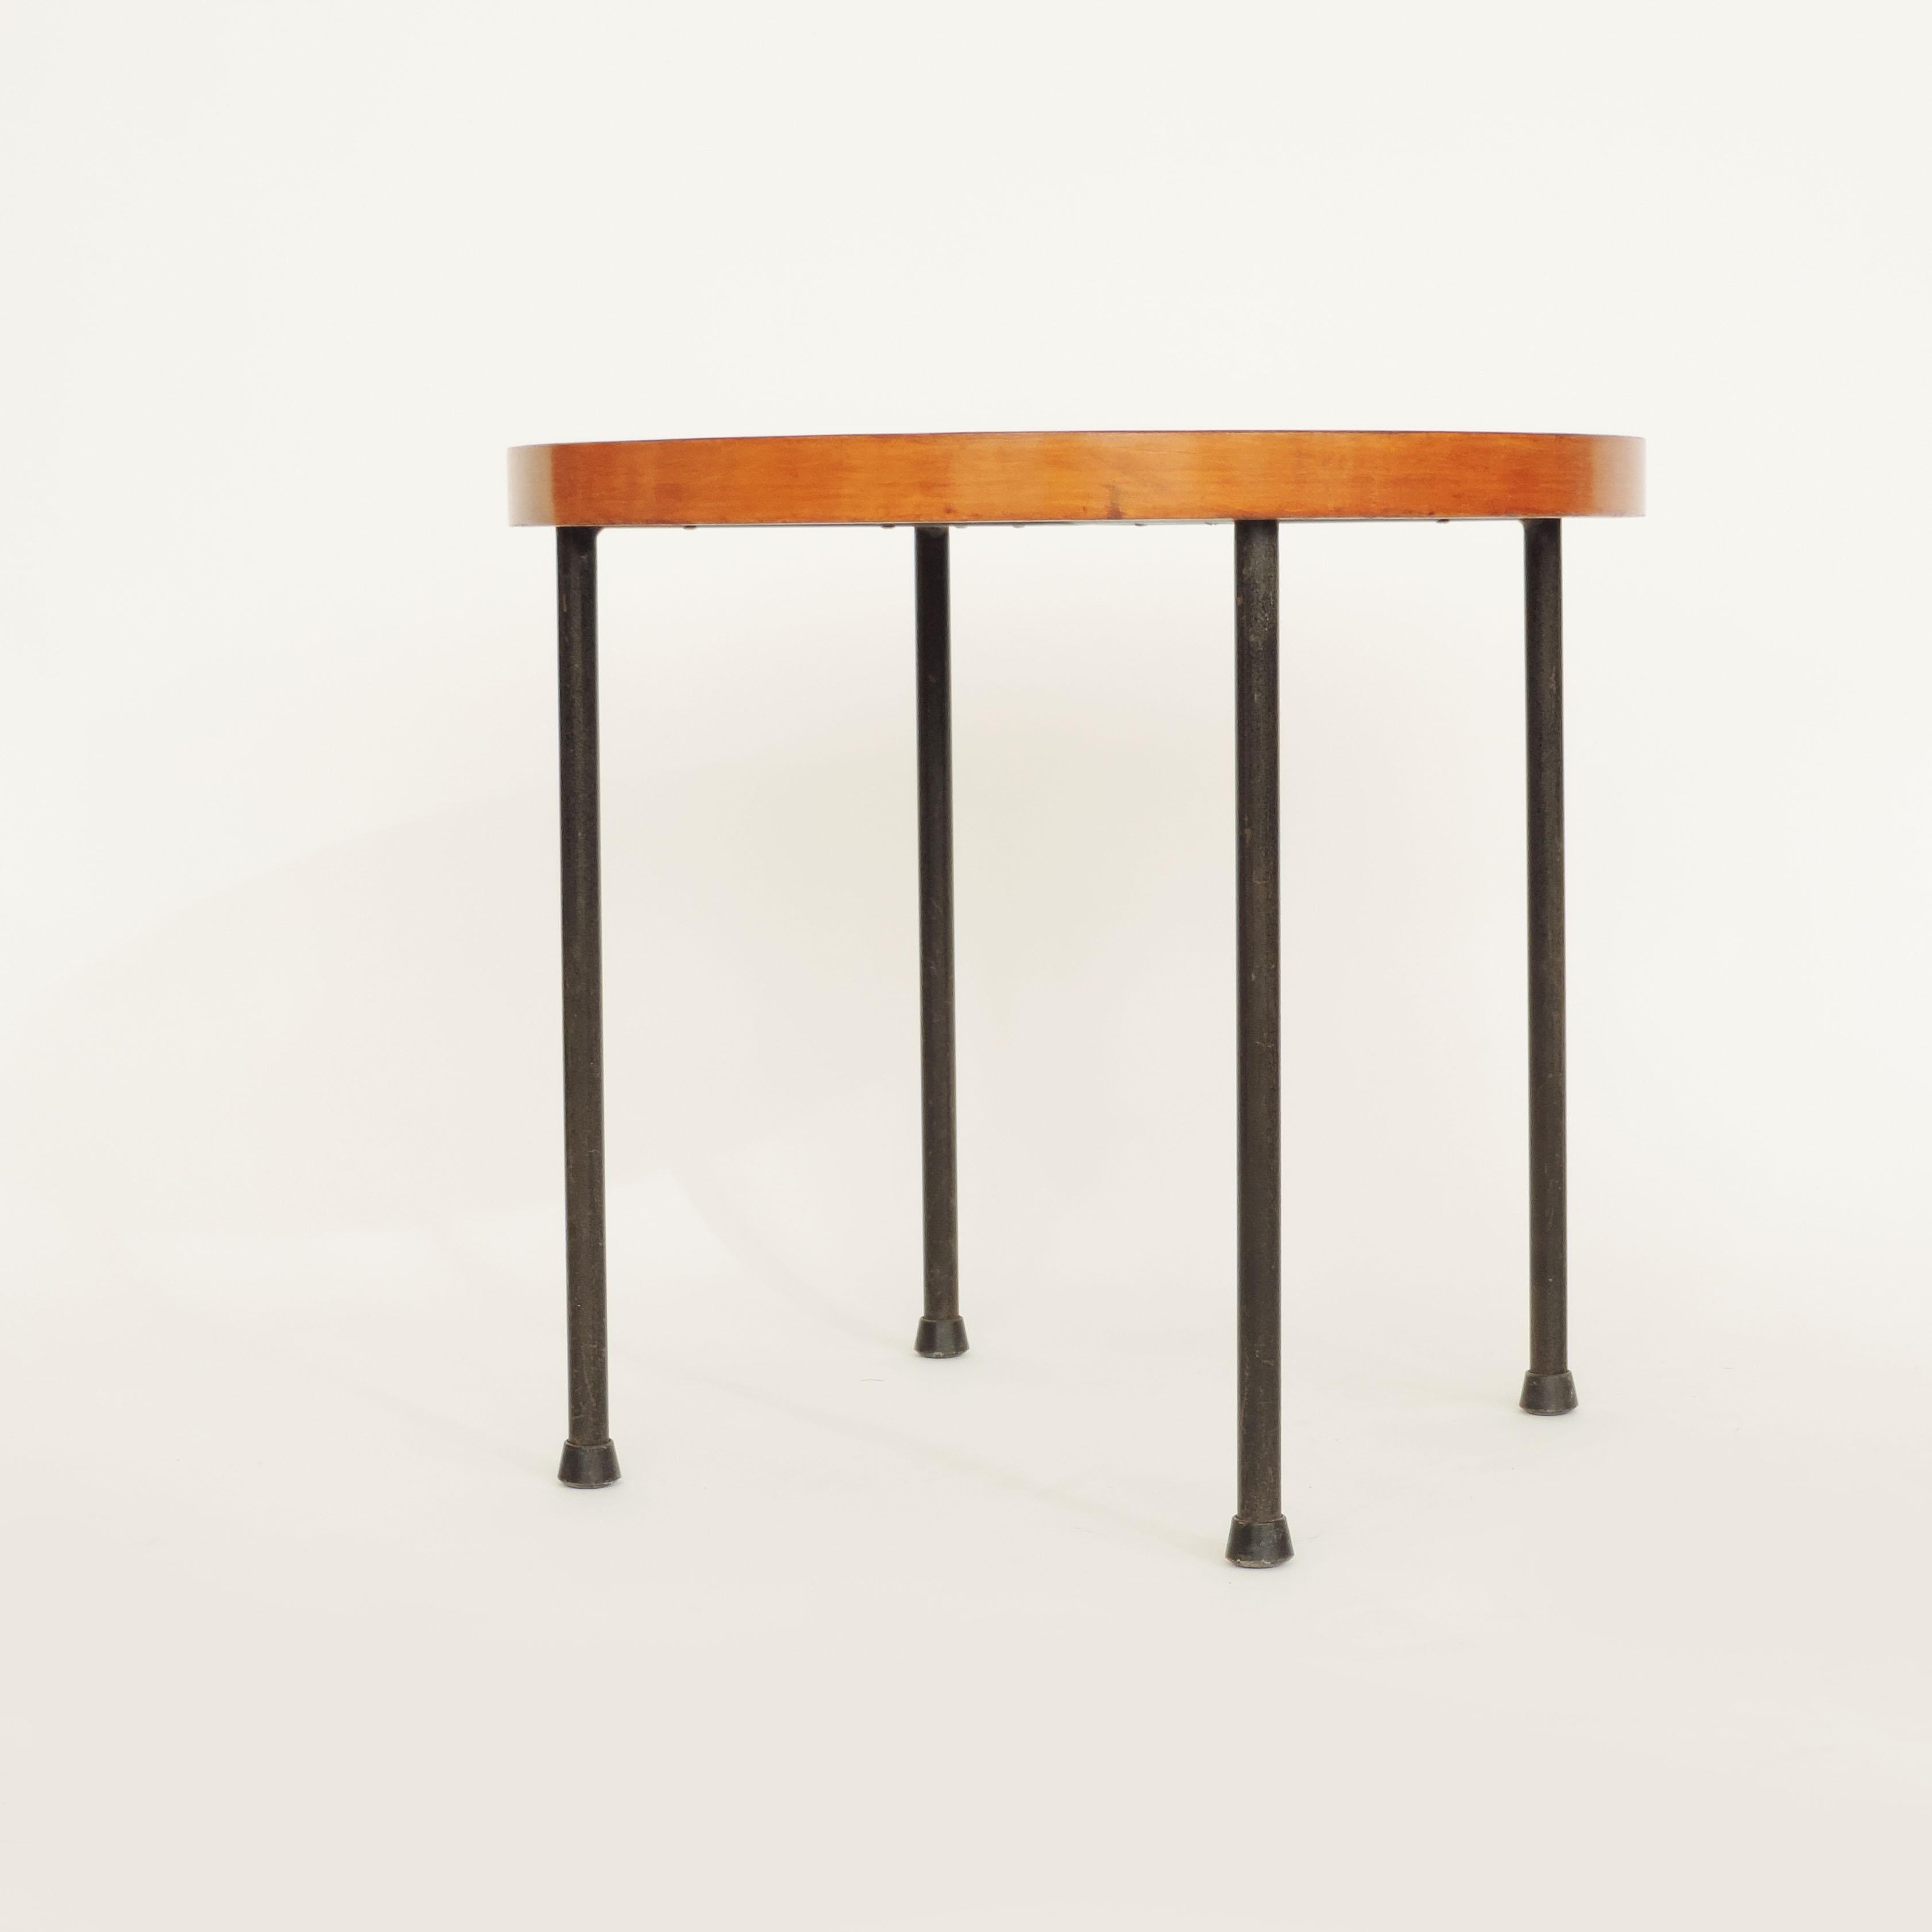 Set of three wood and metal side tables France or Italy, 1950s.